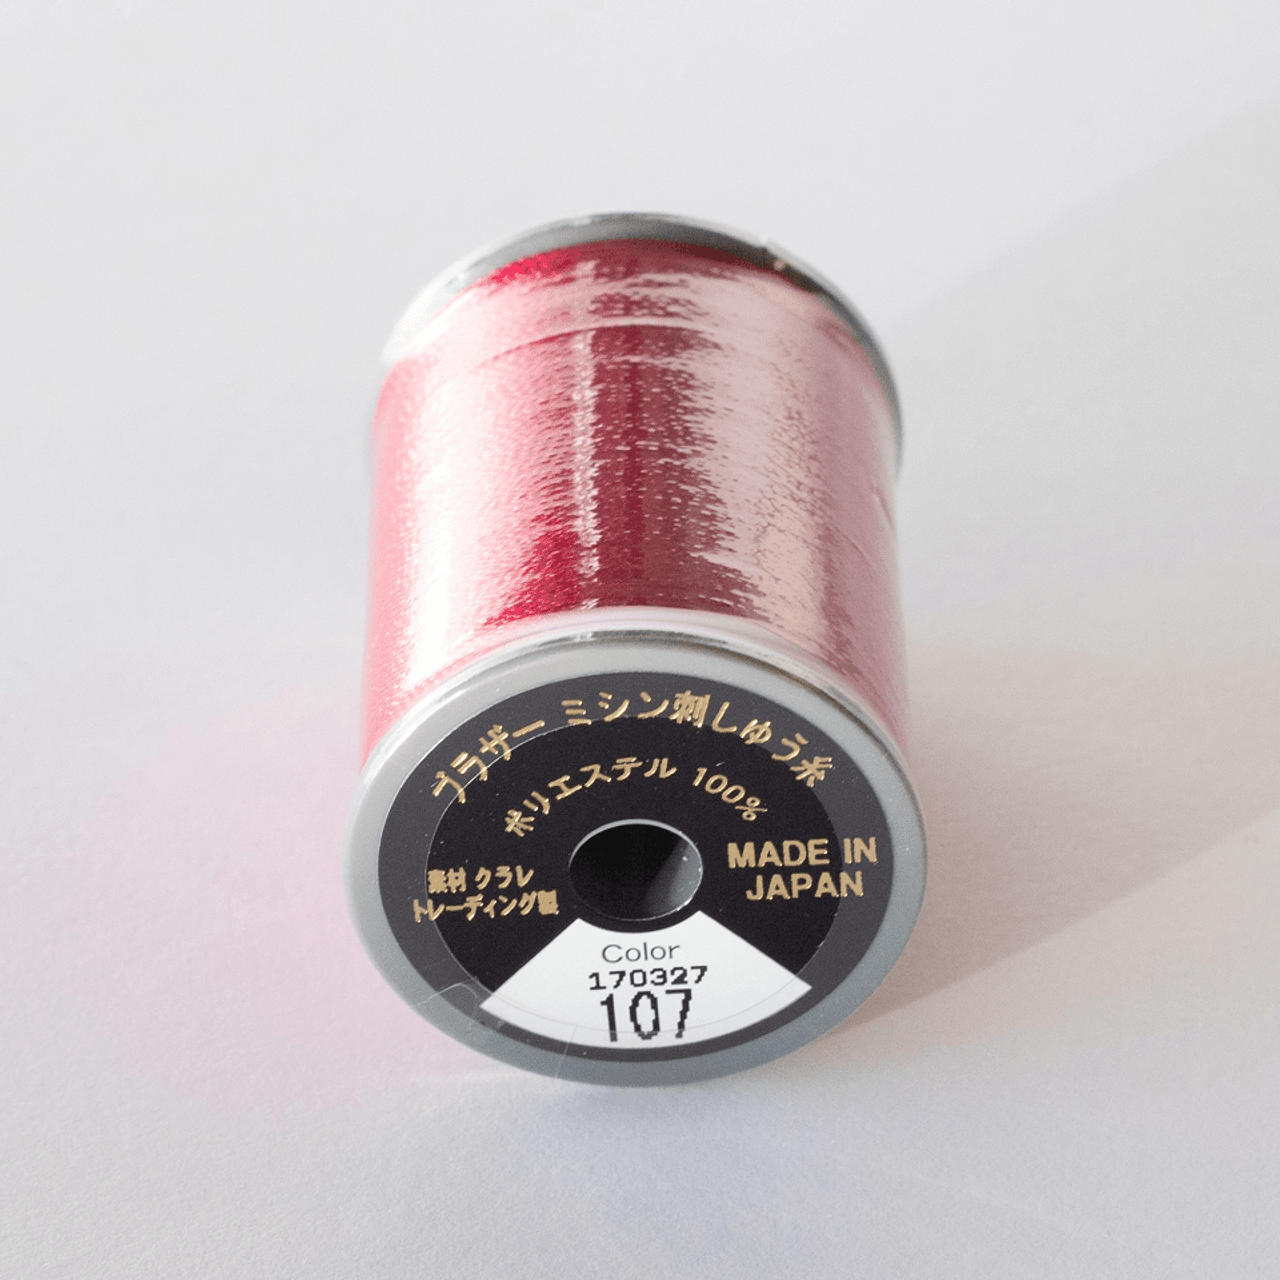 Brother Embroidery Thread, 300m - Red Deer Sewing Centre